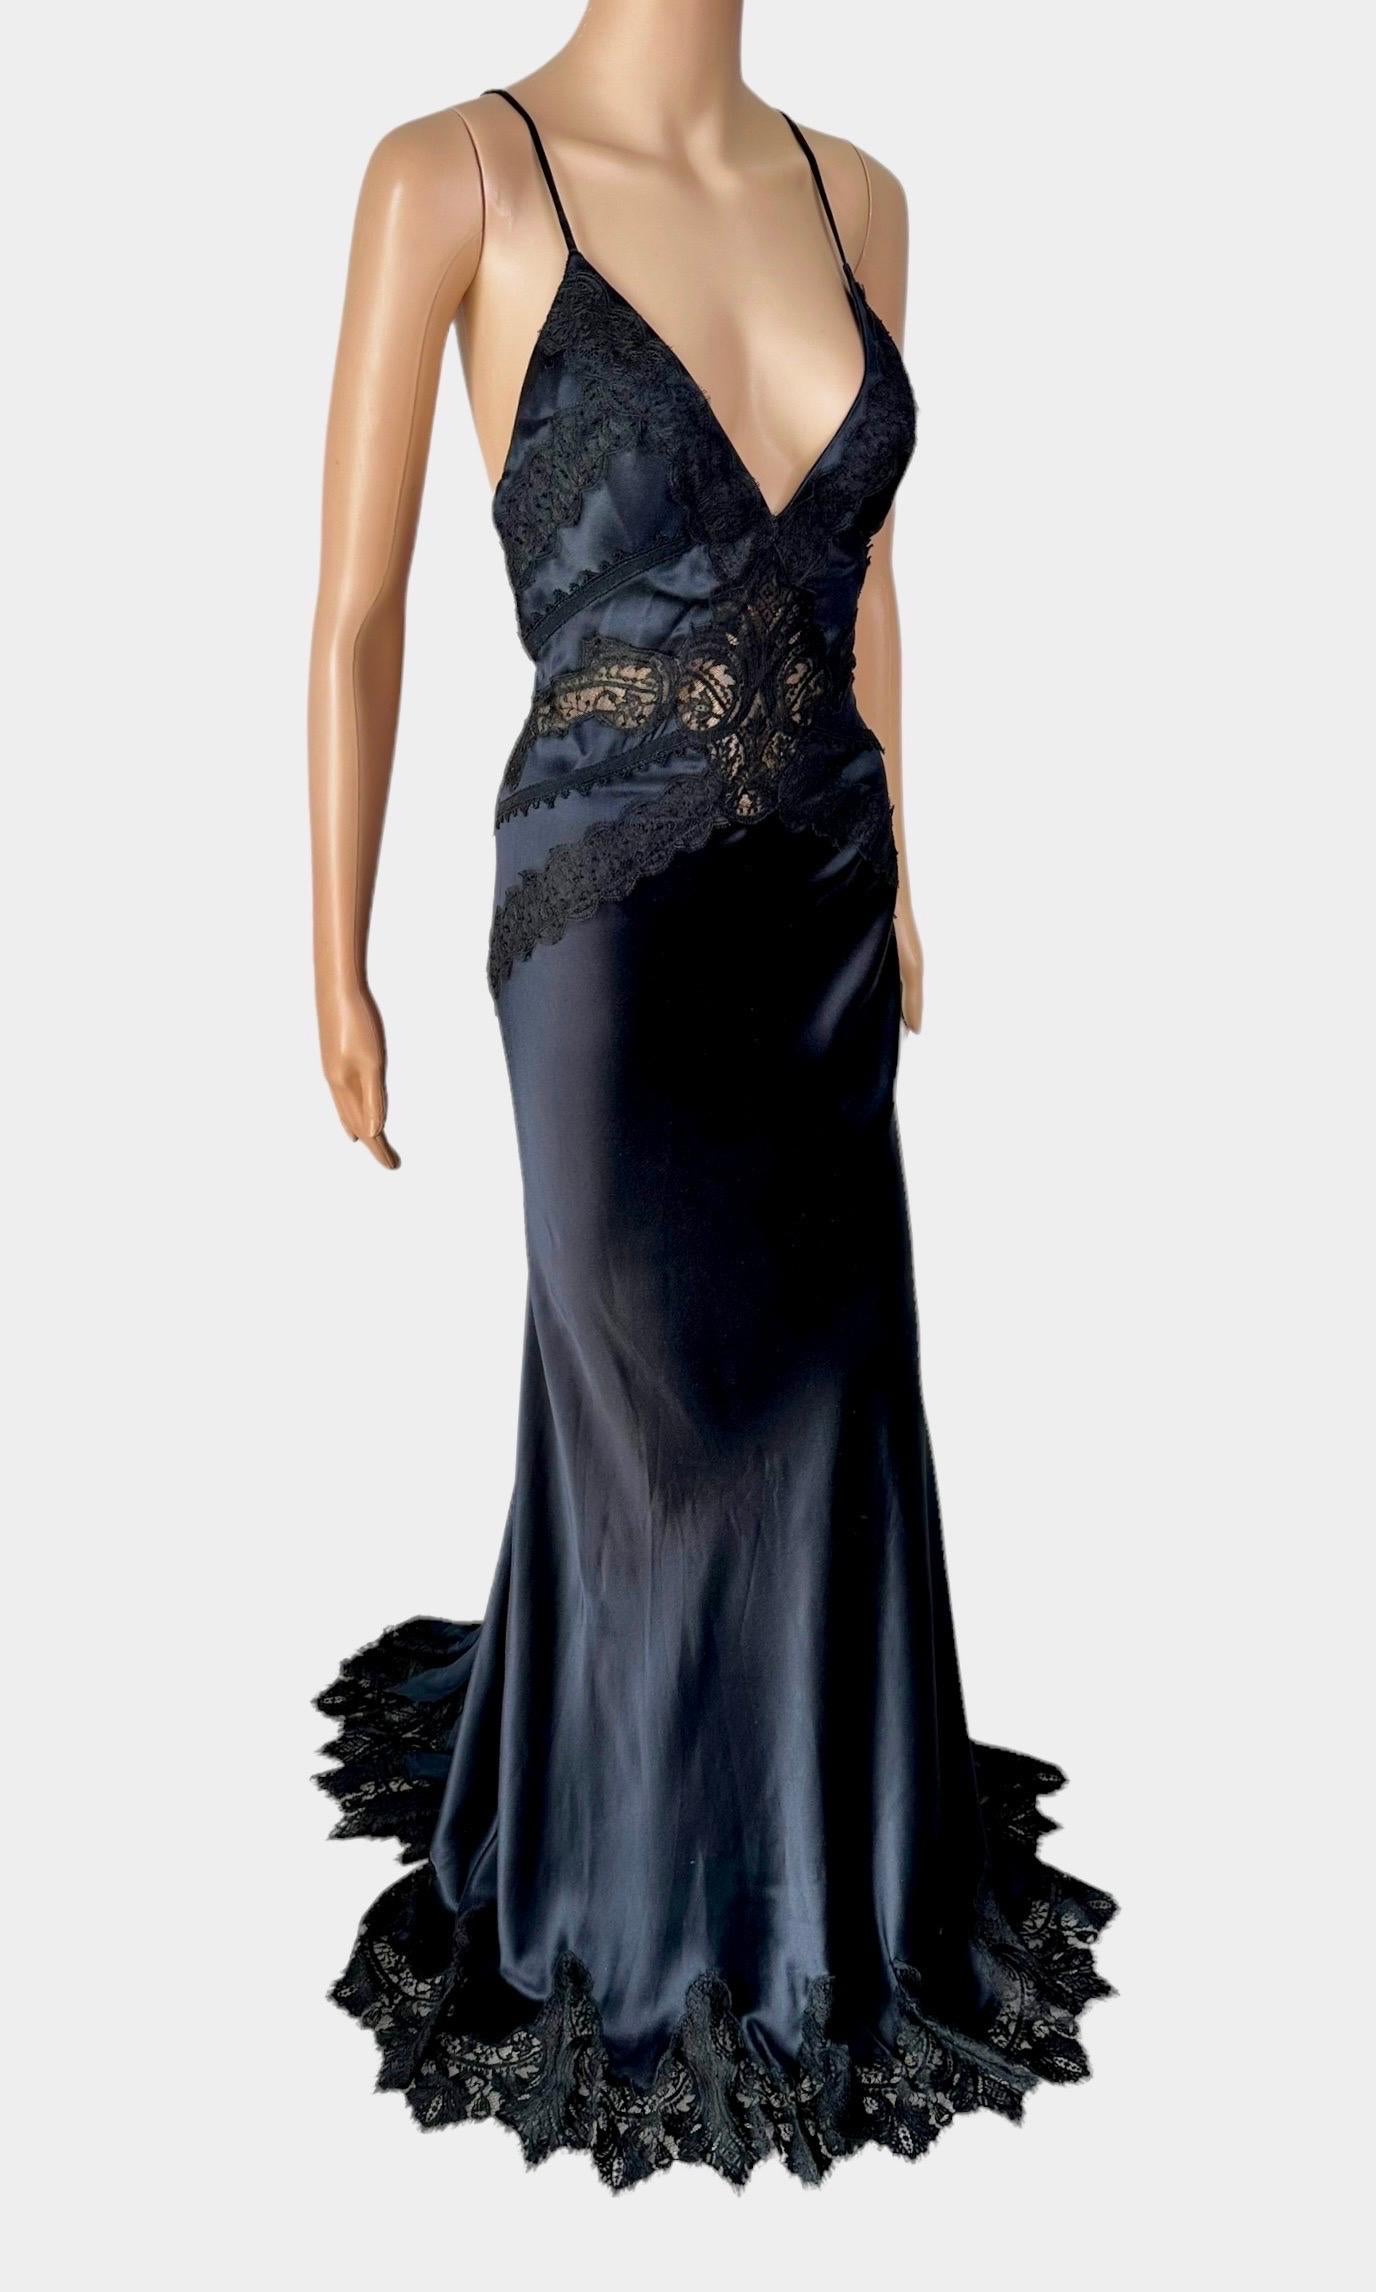 Versace c.2006 Plunging Neckline Sheer Lace Panels Backless Evening Dress Gown  For Sale 2